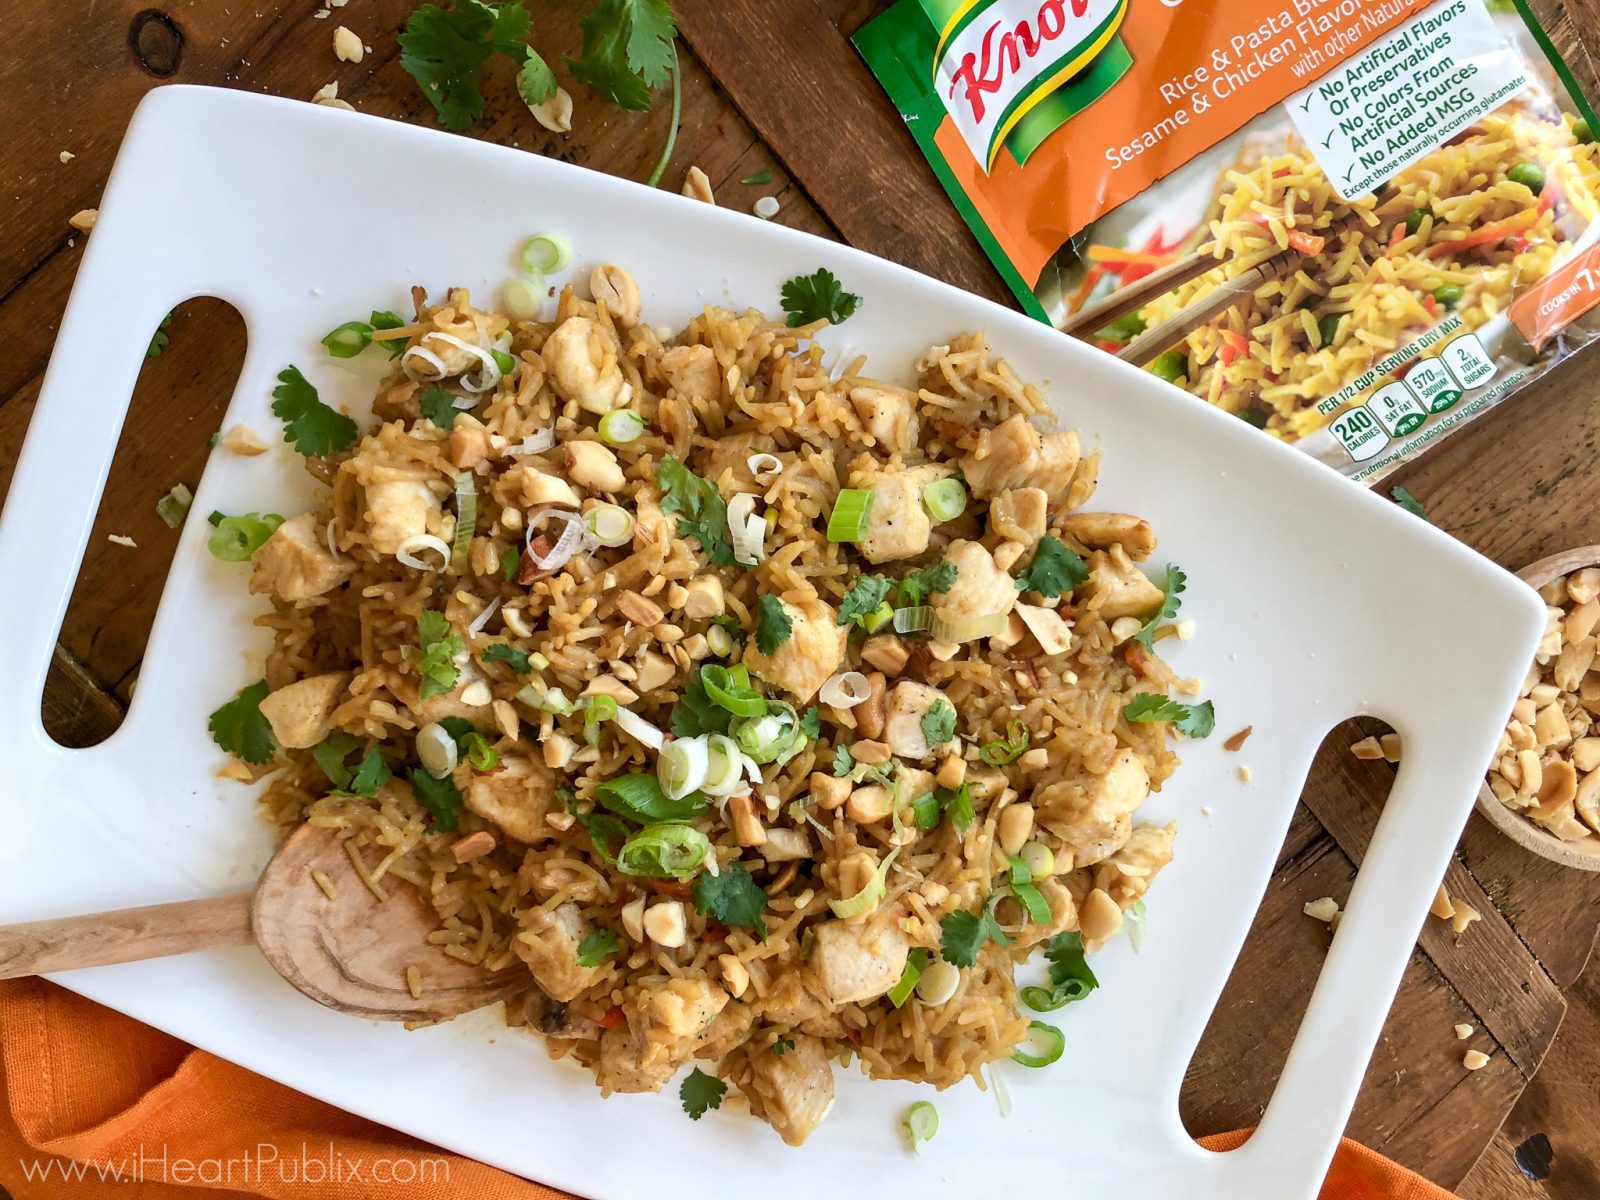 Try This Peanut Chicken Fried Rice & Save On Tasty Knorr Products With Publix